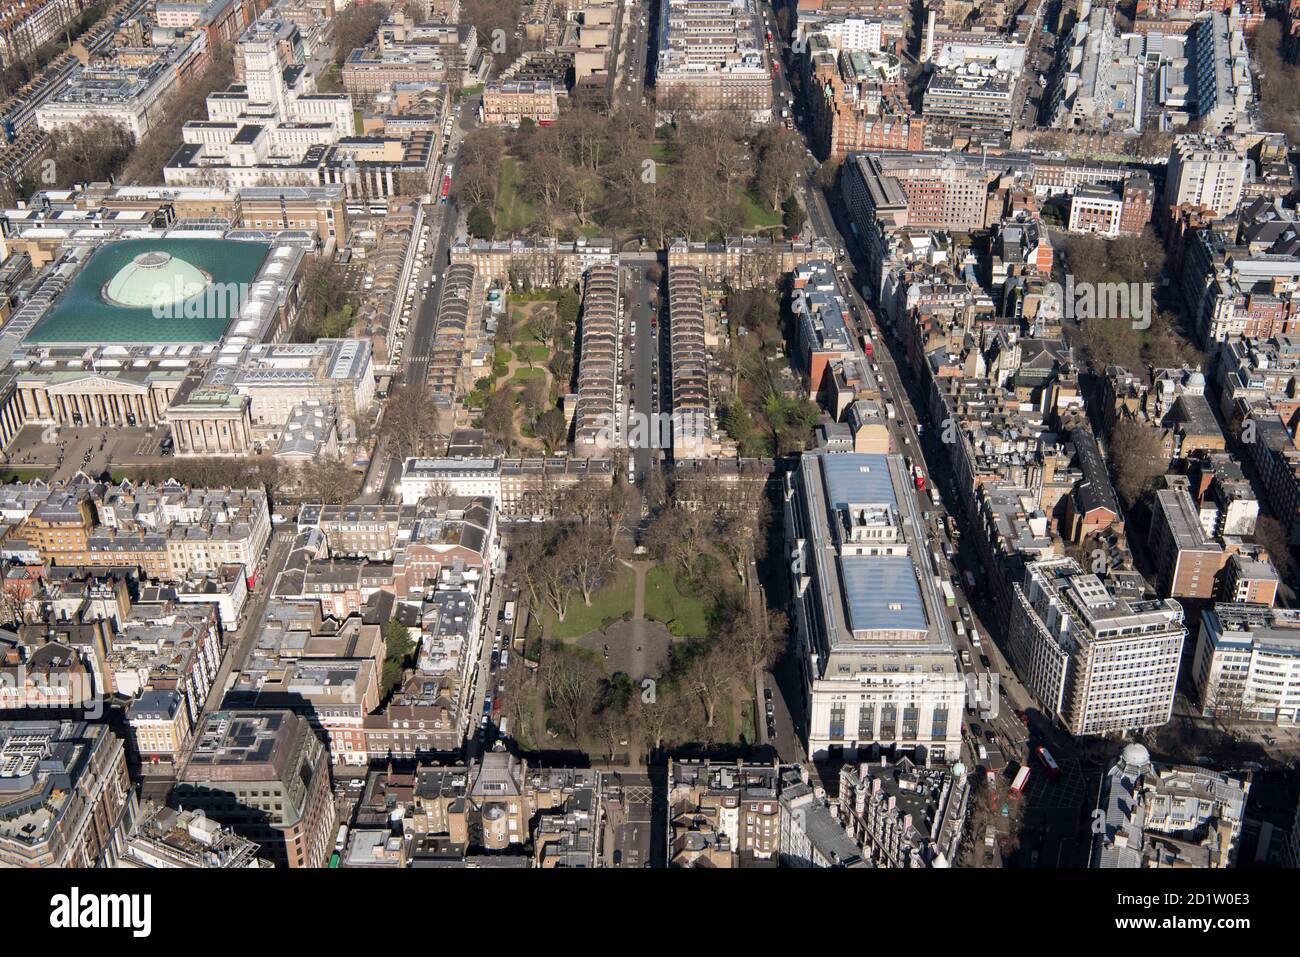 Bloomsbury Square Gardens and Russell Square Gardens, Bloomsbury, London, 2018, UK. Aerial view. Stock Photo